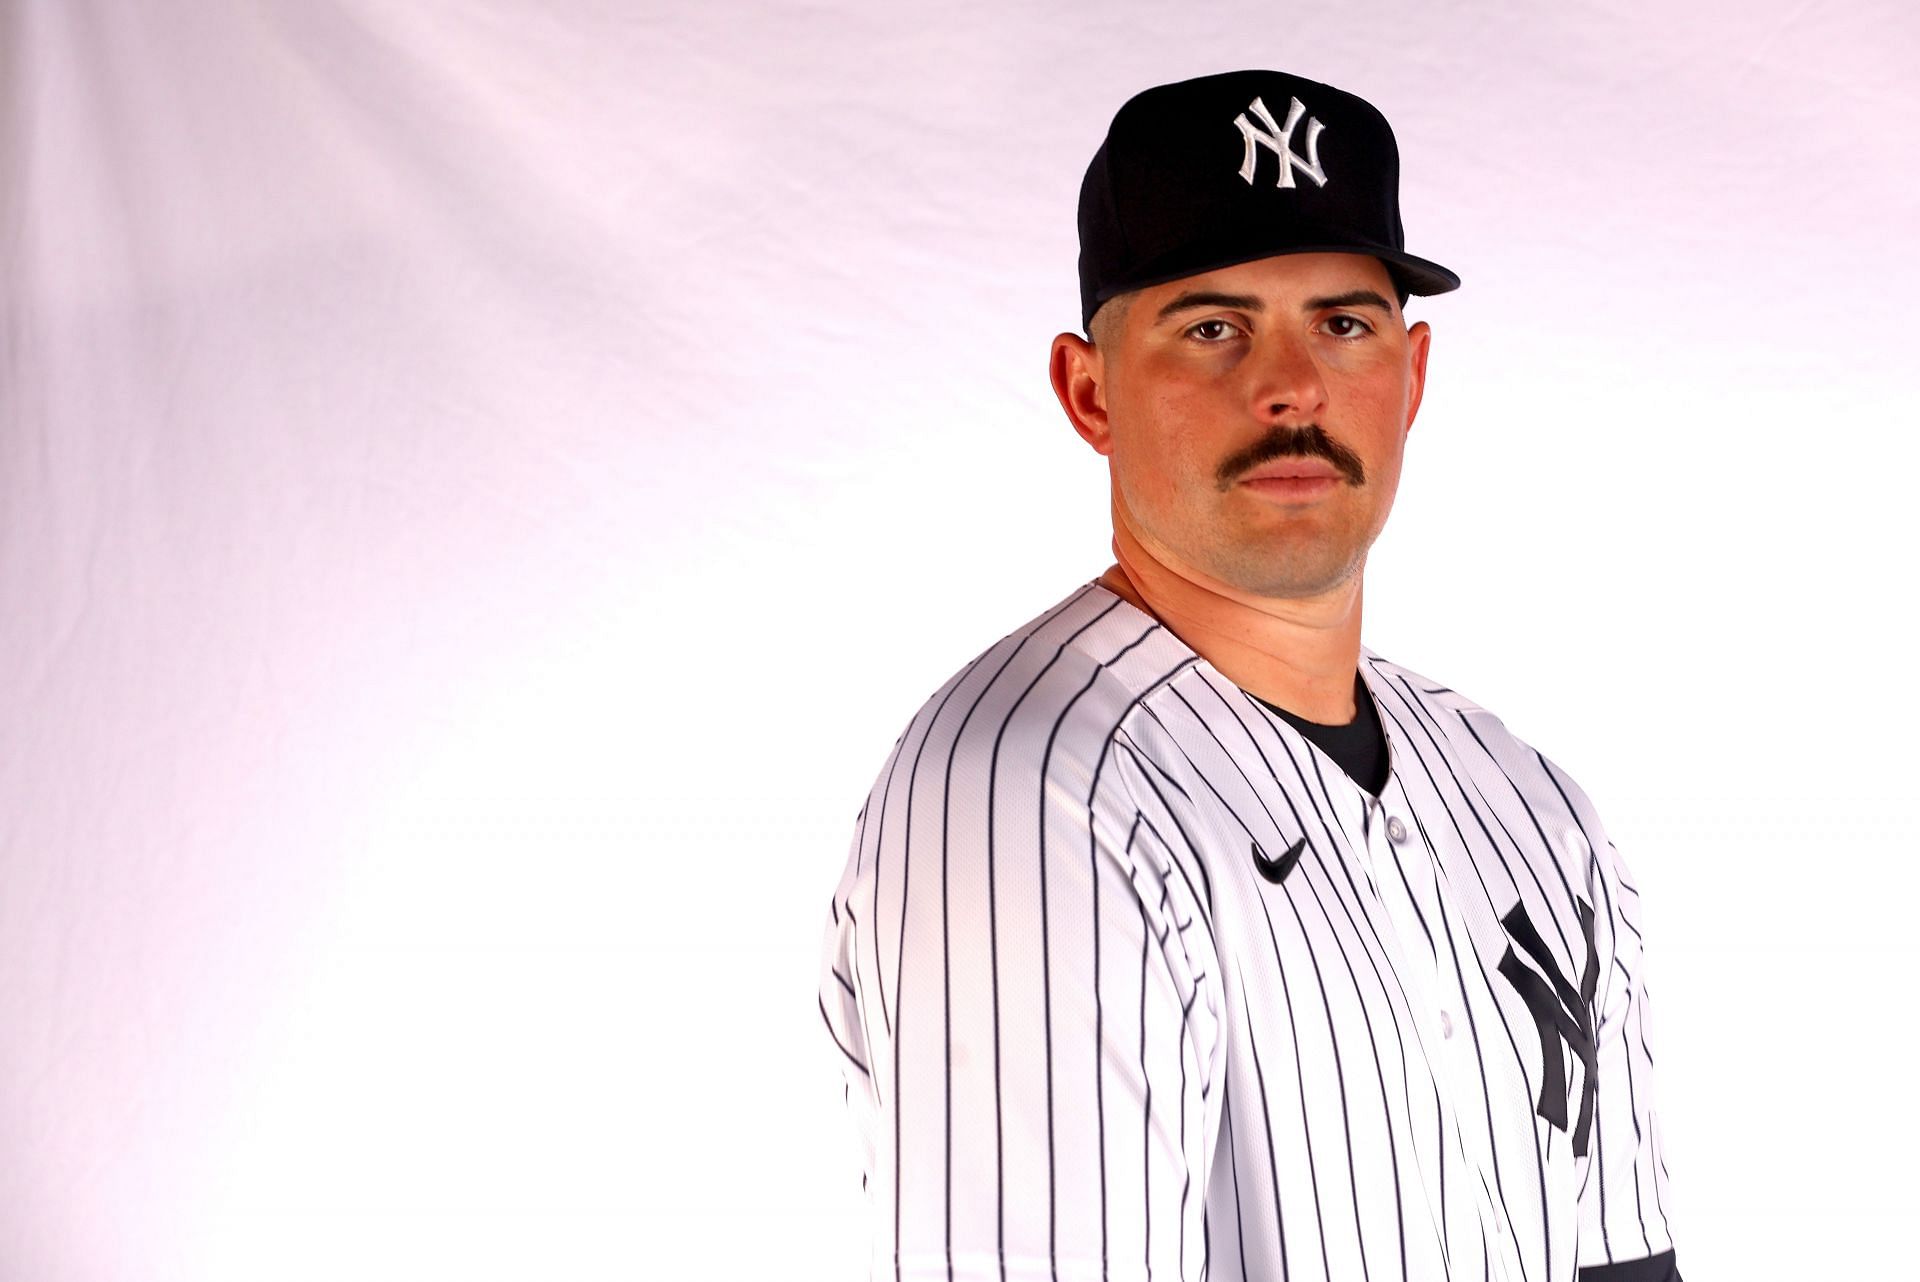 Yankees fans will eat up Carlos Rodón's first spring training interview